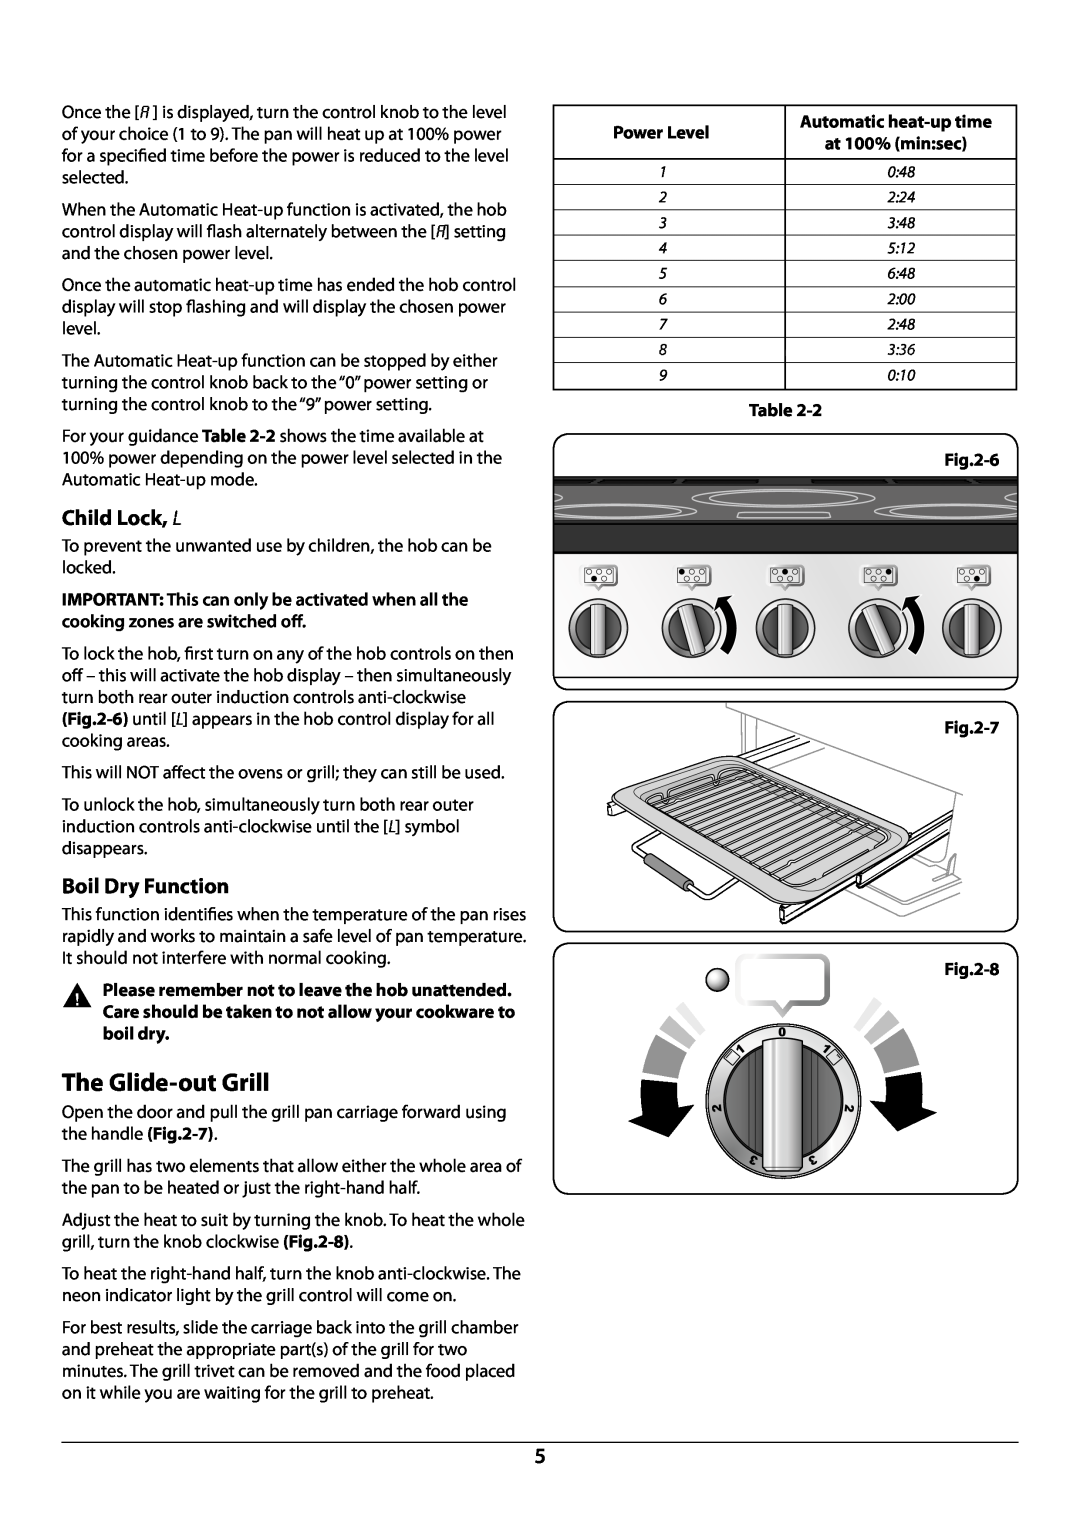 Rangemaster U109941 - 02 manual The Glide-out Grill, Child Lock, L, Boil Dry Function, 6, 7, 8 